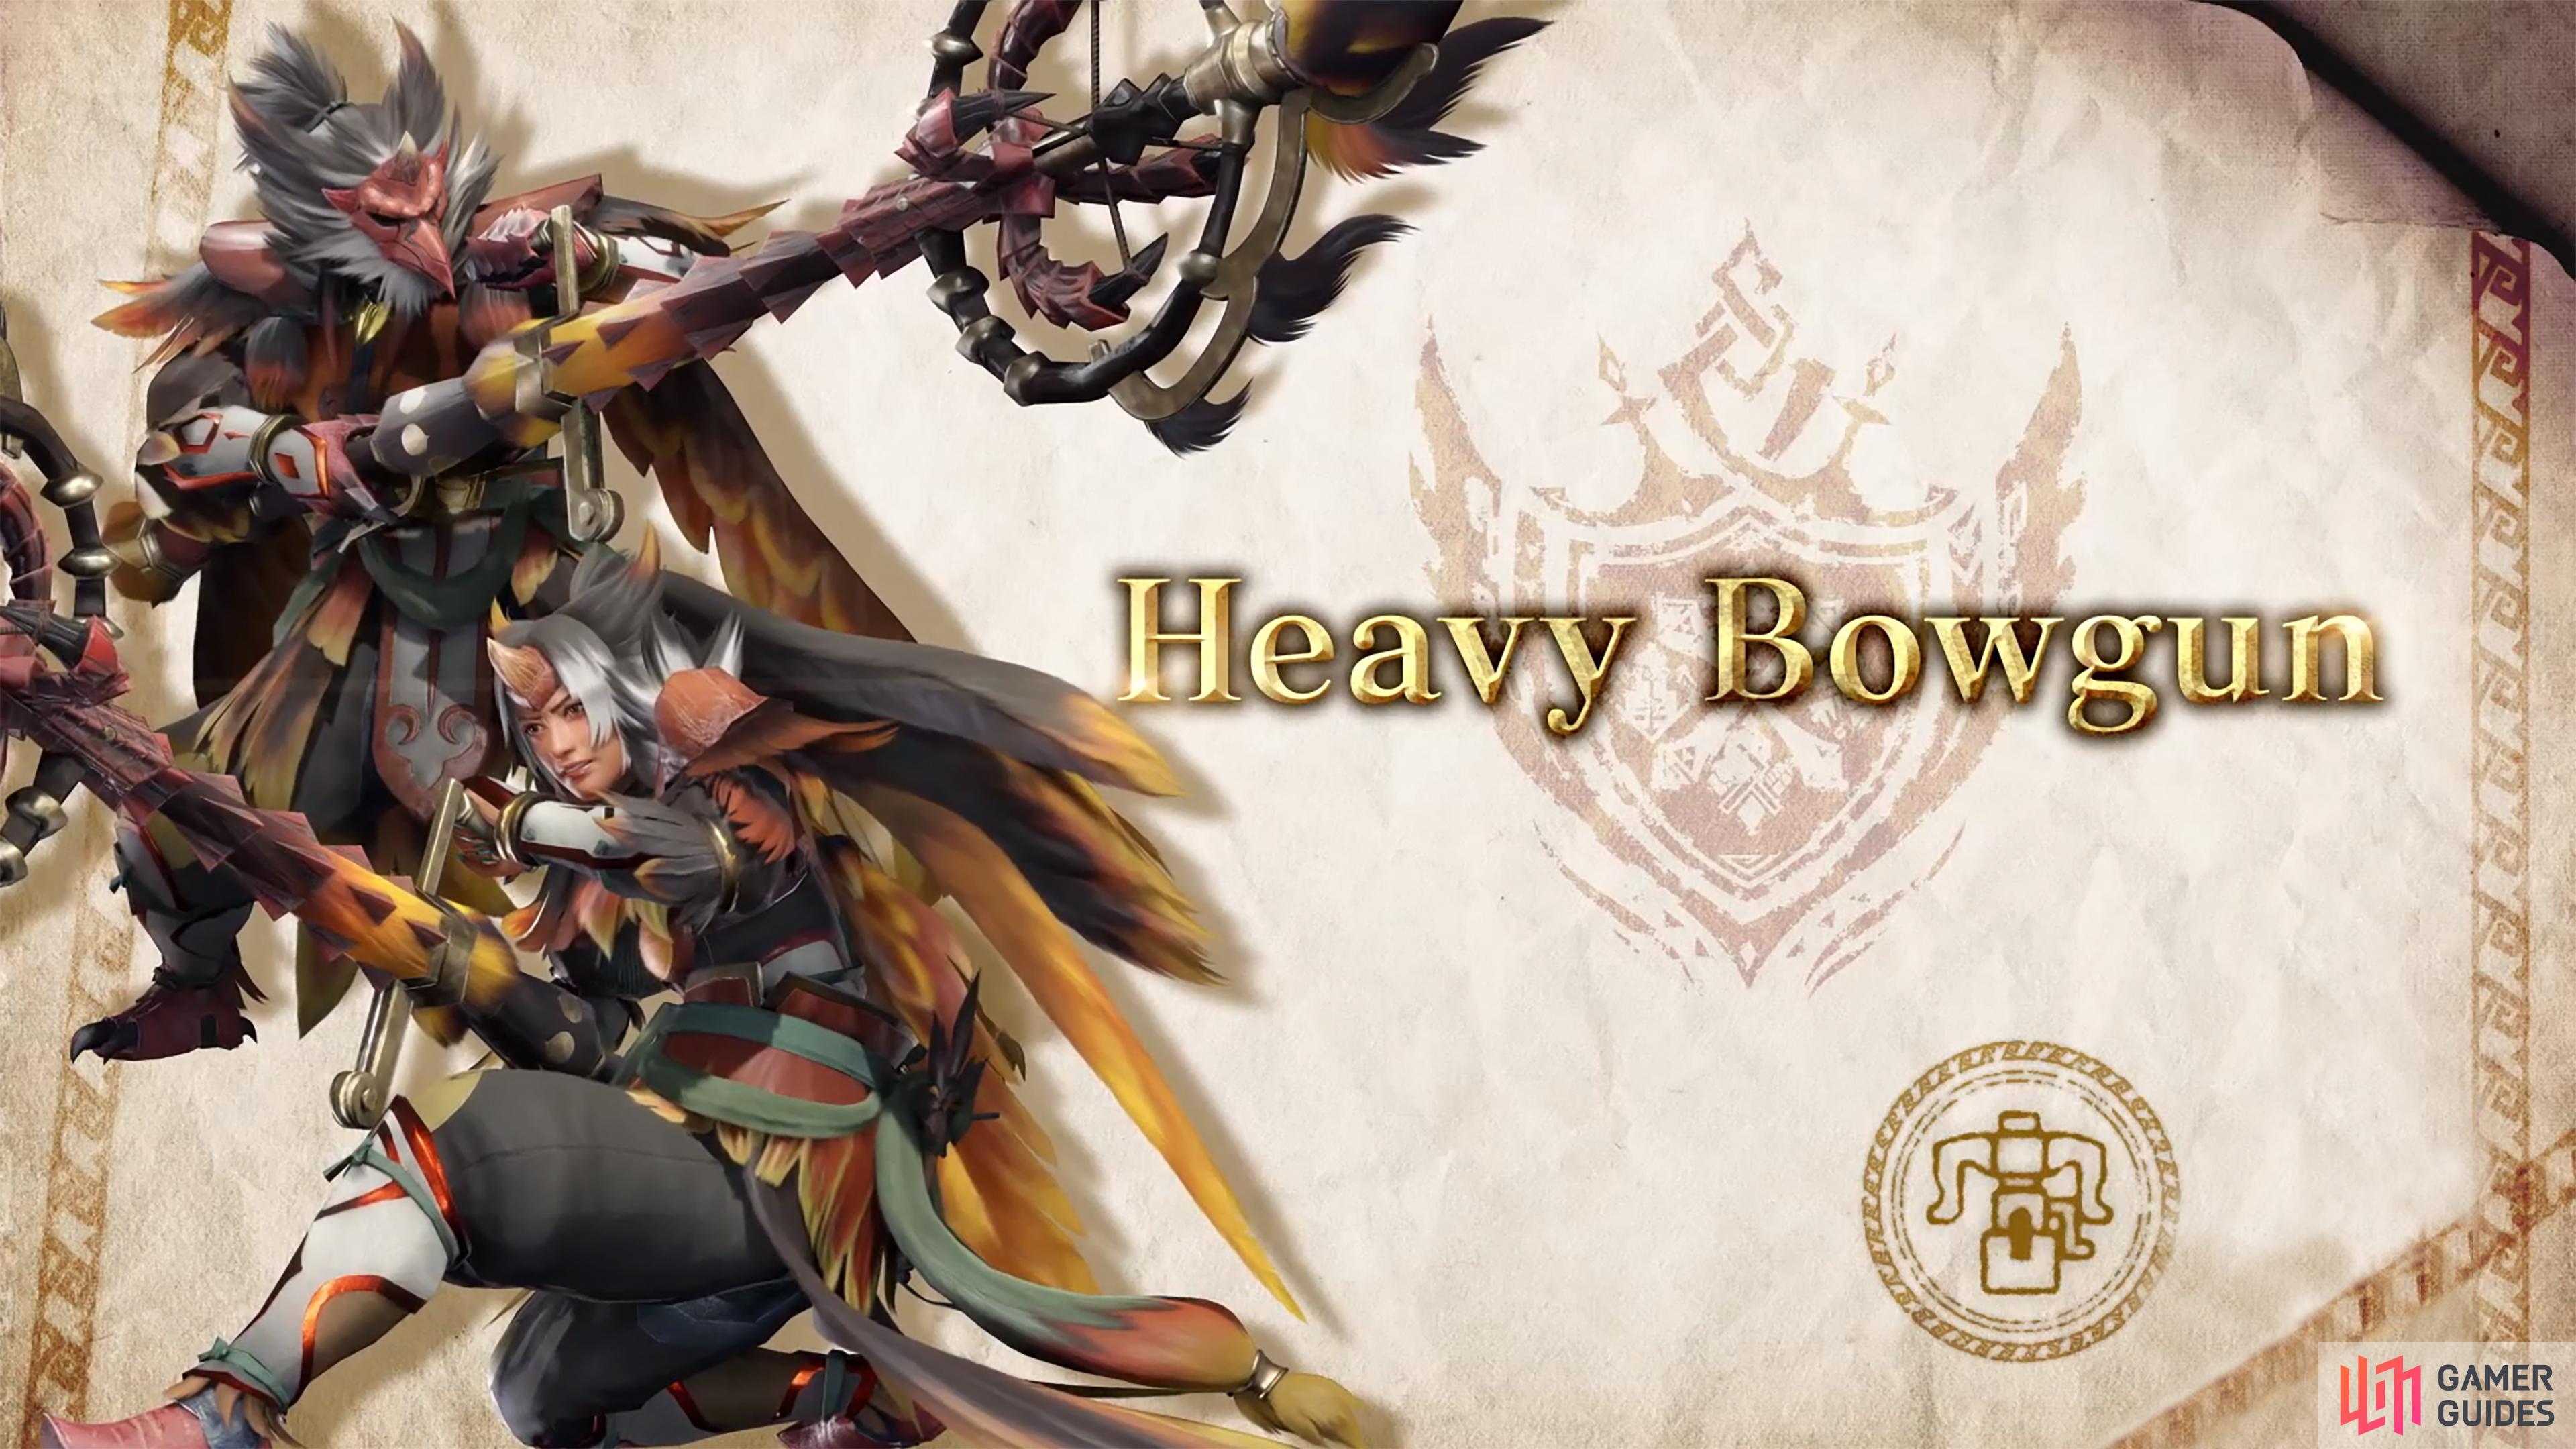 The Heavy Bowgun is a destructive-ranged weapon that focuses on heavy firepower.